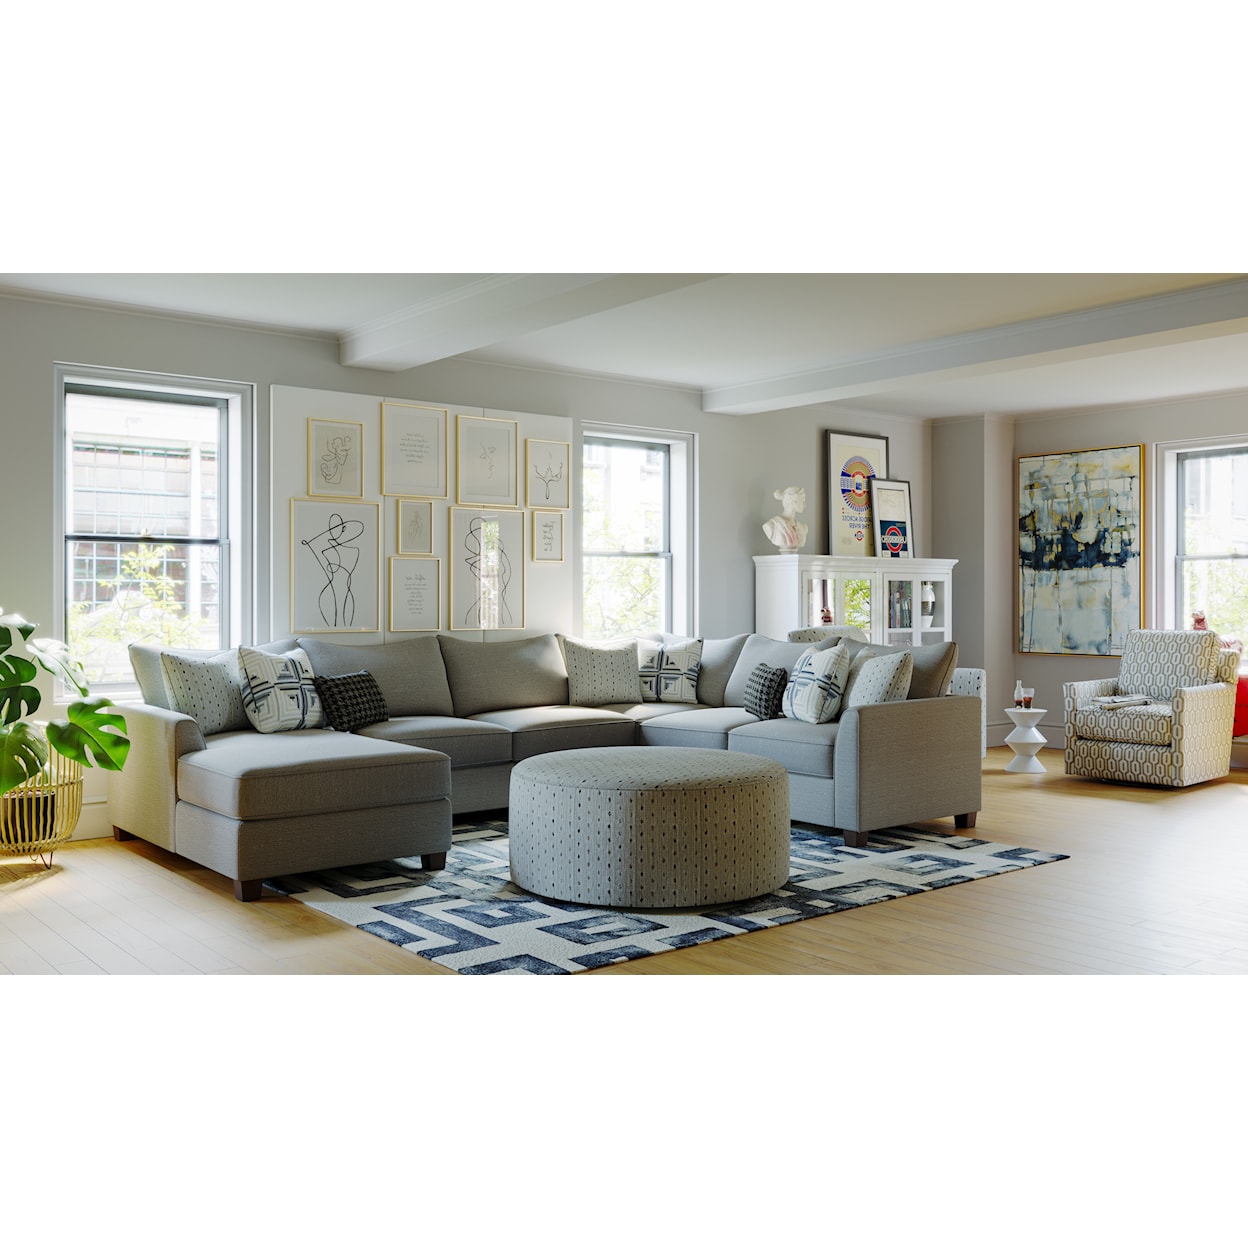 VFM Signature 28 PALM BEACH IRON 3-Piece Sectional with Left Chaise